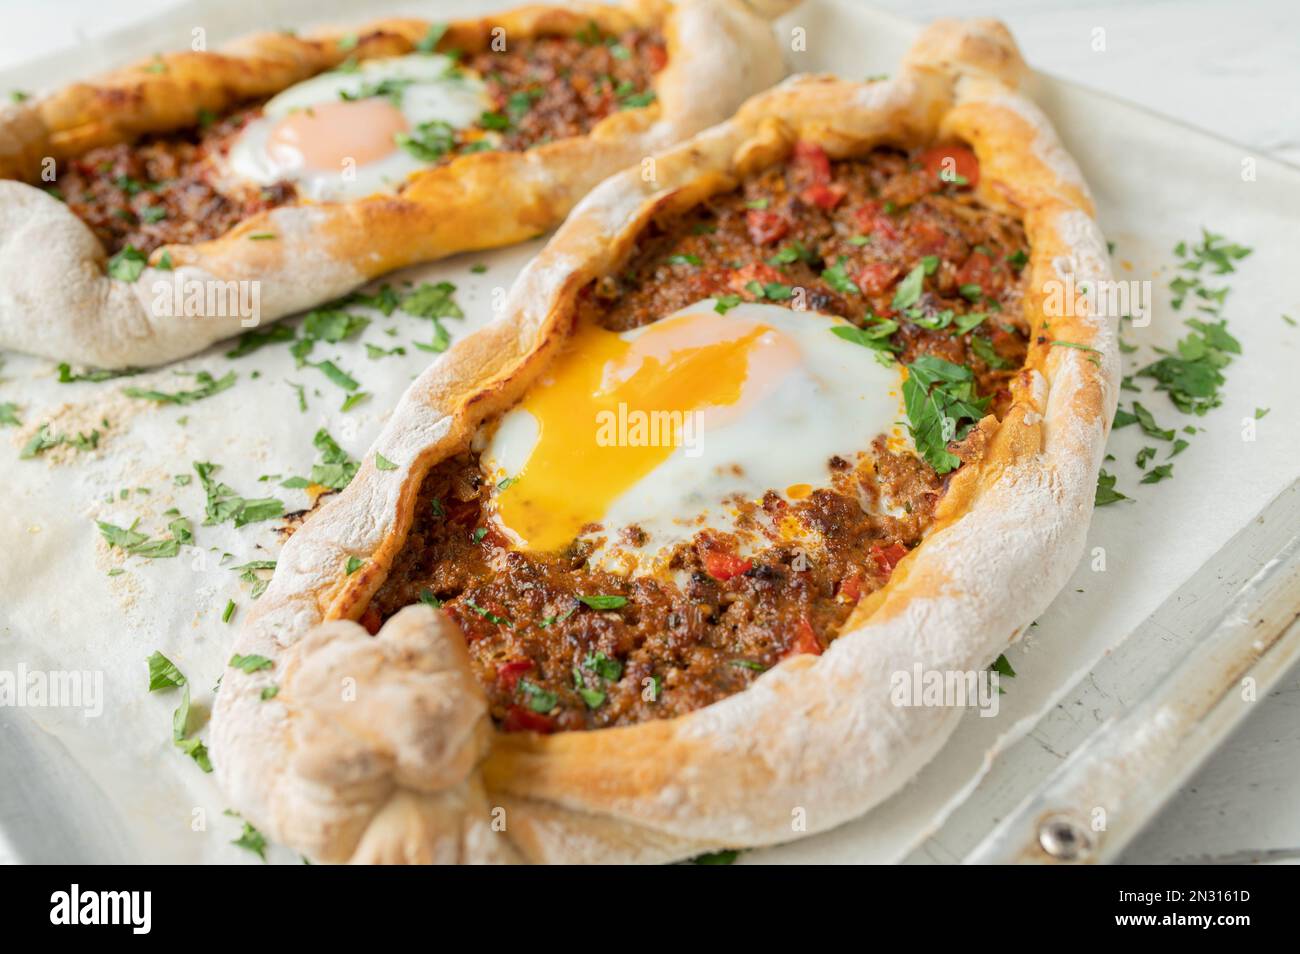 Turkish pide with ground beef and egg Stock Photo